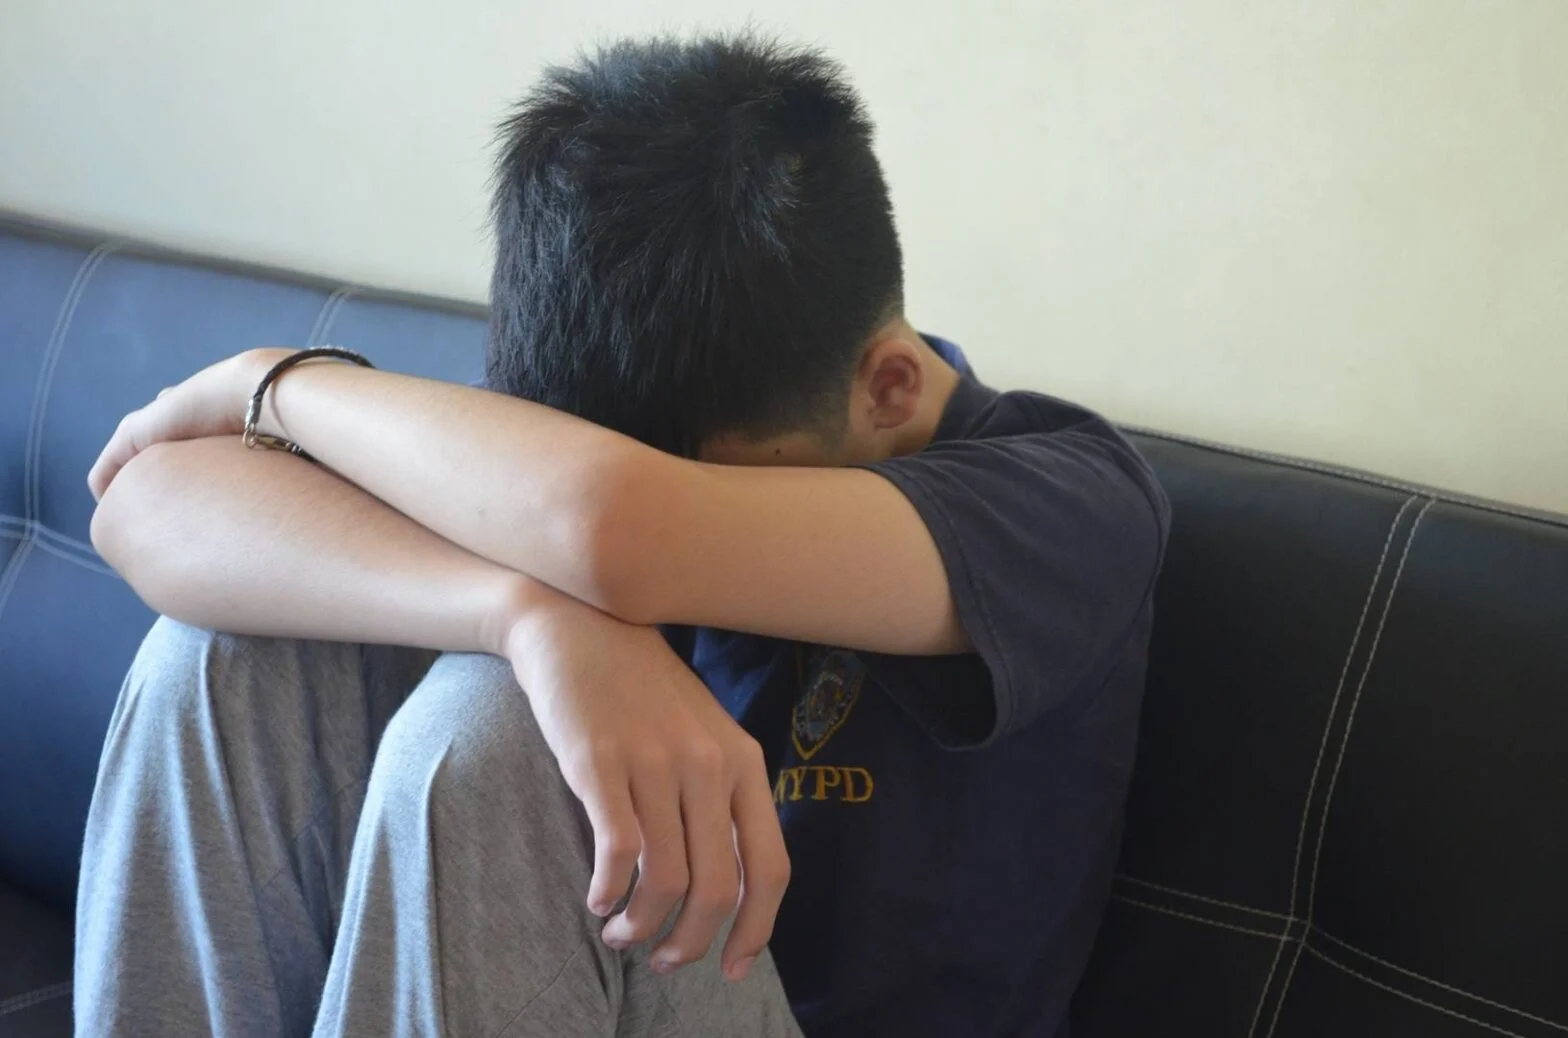 Depression in Adolescents: What Parents Need to Know